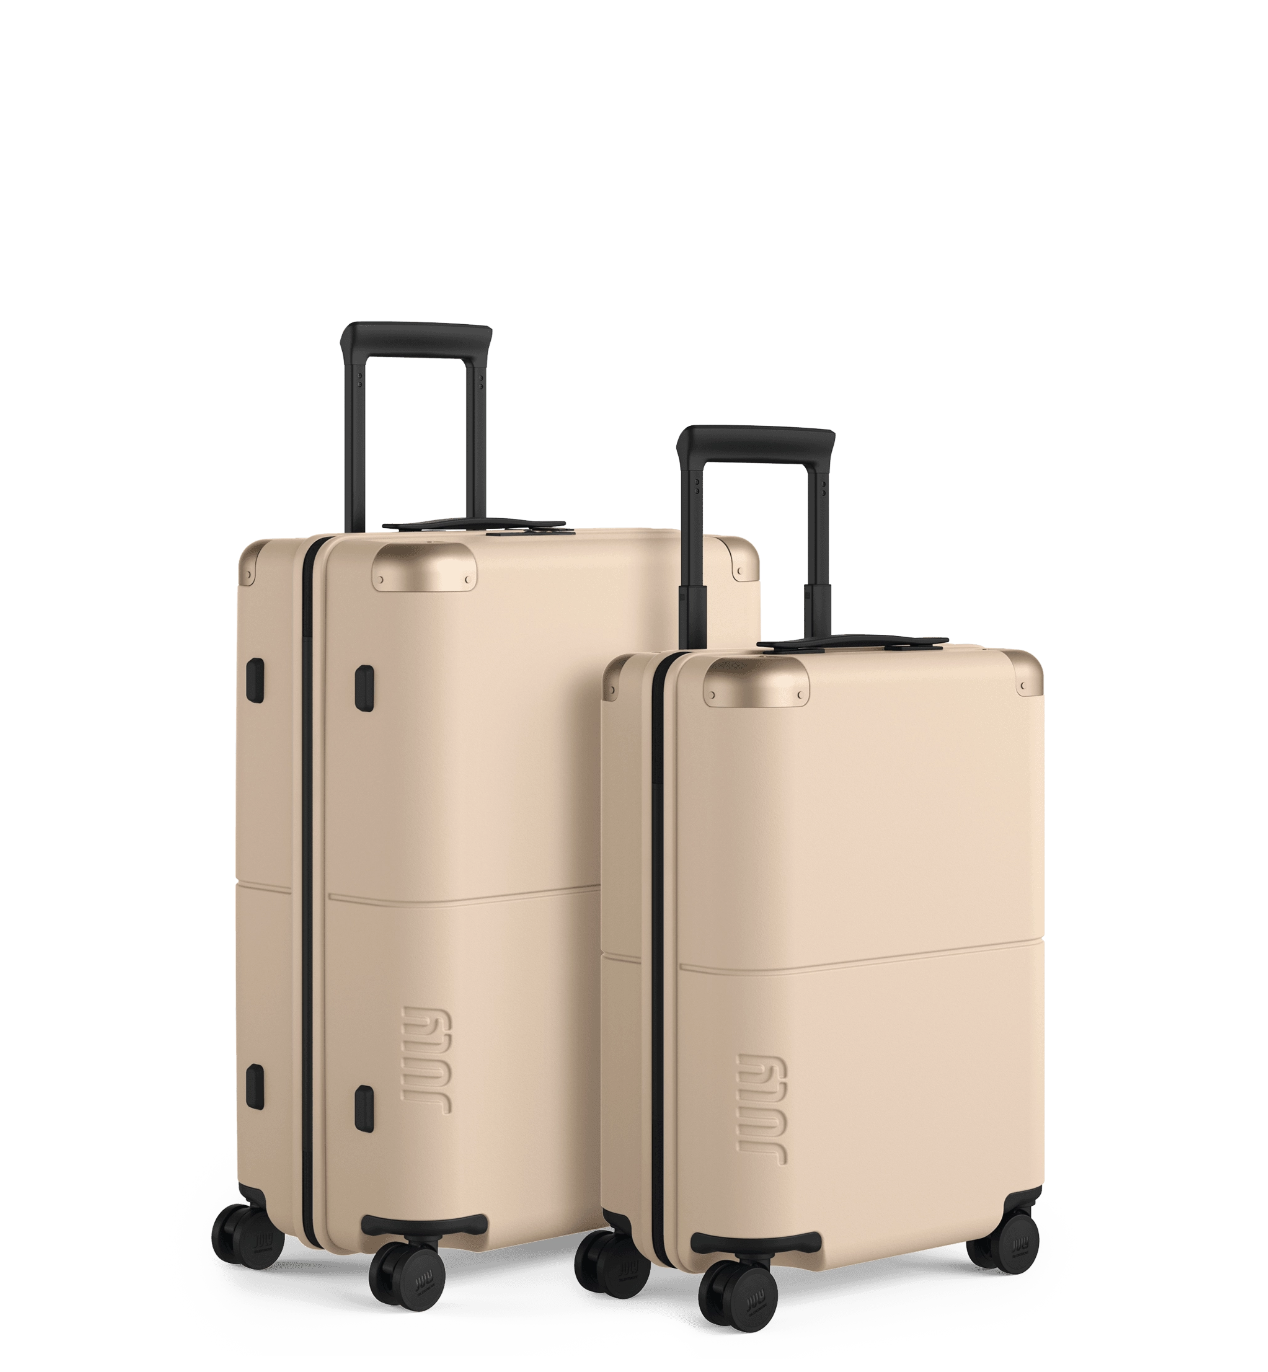 <p><strong>$585.00</strong></p><p>If you're looking for luggage with scratch-proof shells that won't get all dinged up in baggage claim, then let me introduce you to July.</p><ul><li><strong>Return policy</strong>: 100 days </li><li><strong>Warranty:</strong> Lifetime guarantee on manufacturing faults.</li></ul><p><em><strong>THE REVIEWS:</strong> Took my new bag on a girl's trip. Was able to fit almost everything in it for a five-day trip, and I didn’t really even try to pack well! There was room to spare. It was silent when rolling even on a wooden walkway," one reviewer writes. "So far, I 'm so in love. Glad I researched and got my bag from July."</em></p>